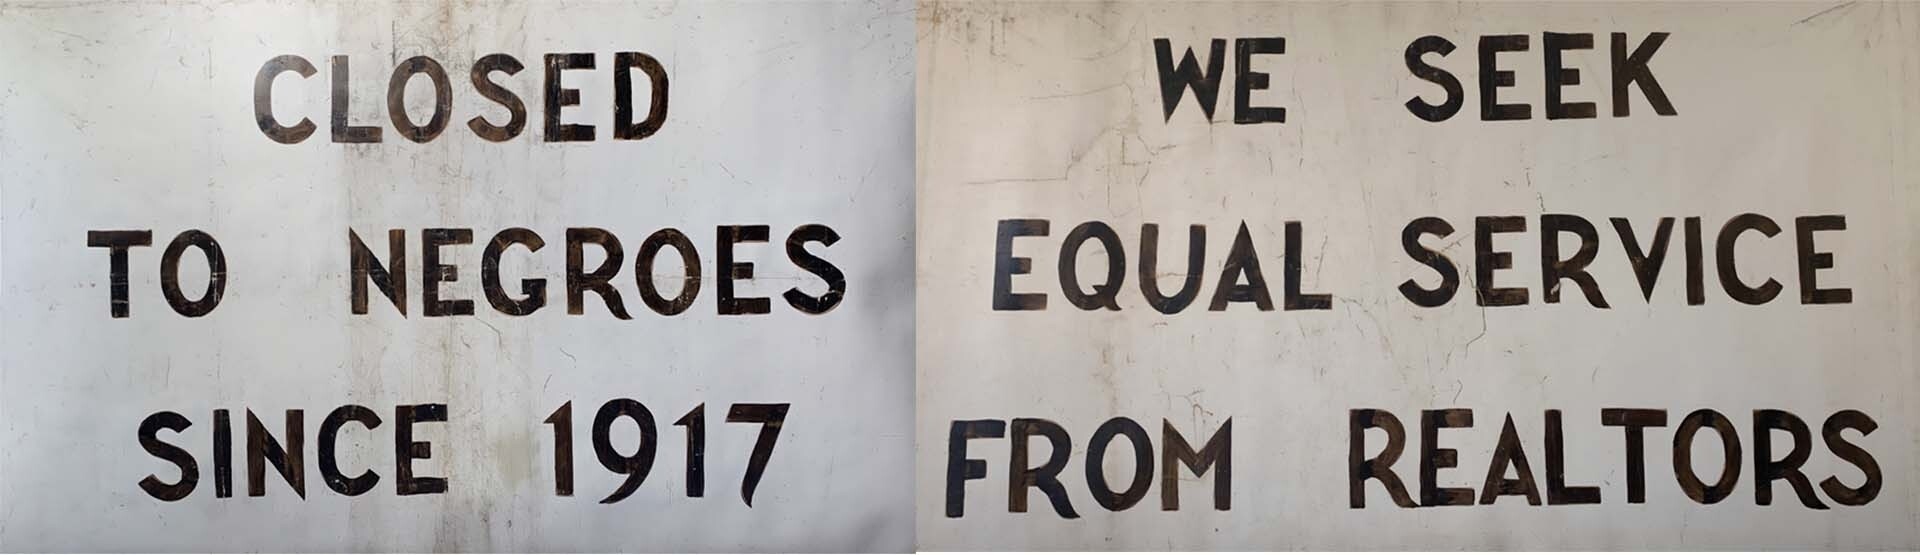 During the summer of 1966, weekly marches demonstrating for a fair housing ordinance in Oak Park targeted the real estate industry which did not support legislation that required equal access for all races.These two banners were carried in those marches.